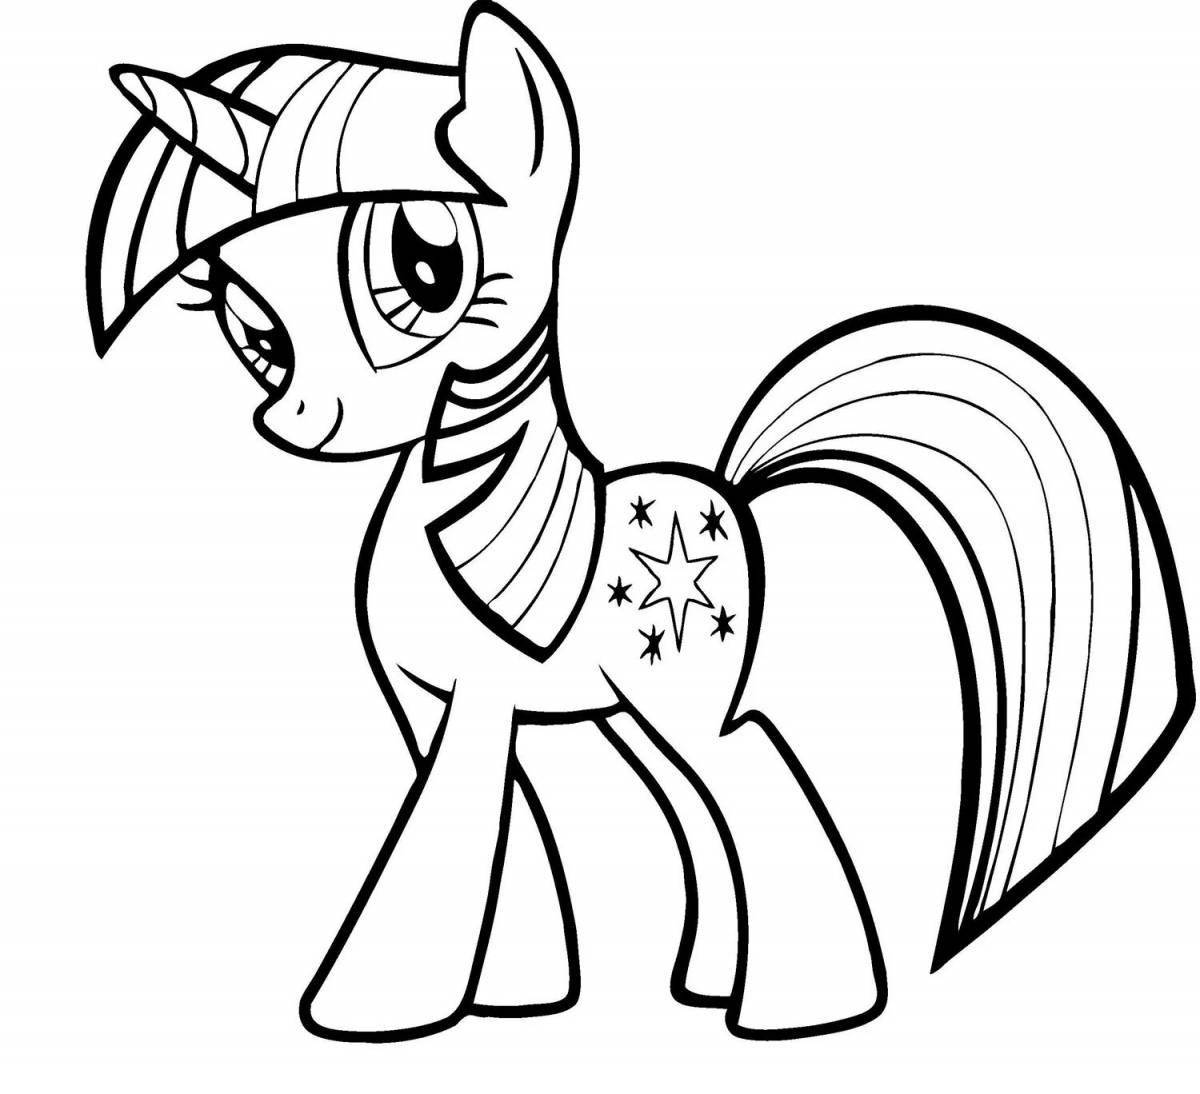 Glorious pony coloring for girls 4-5 years old